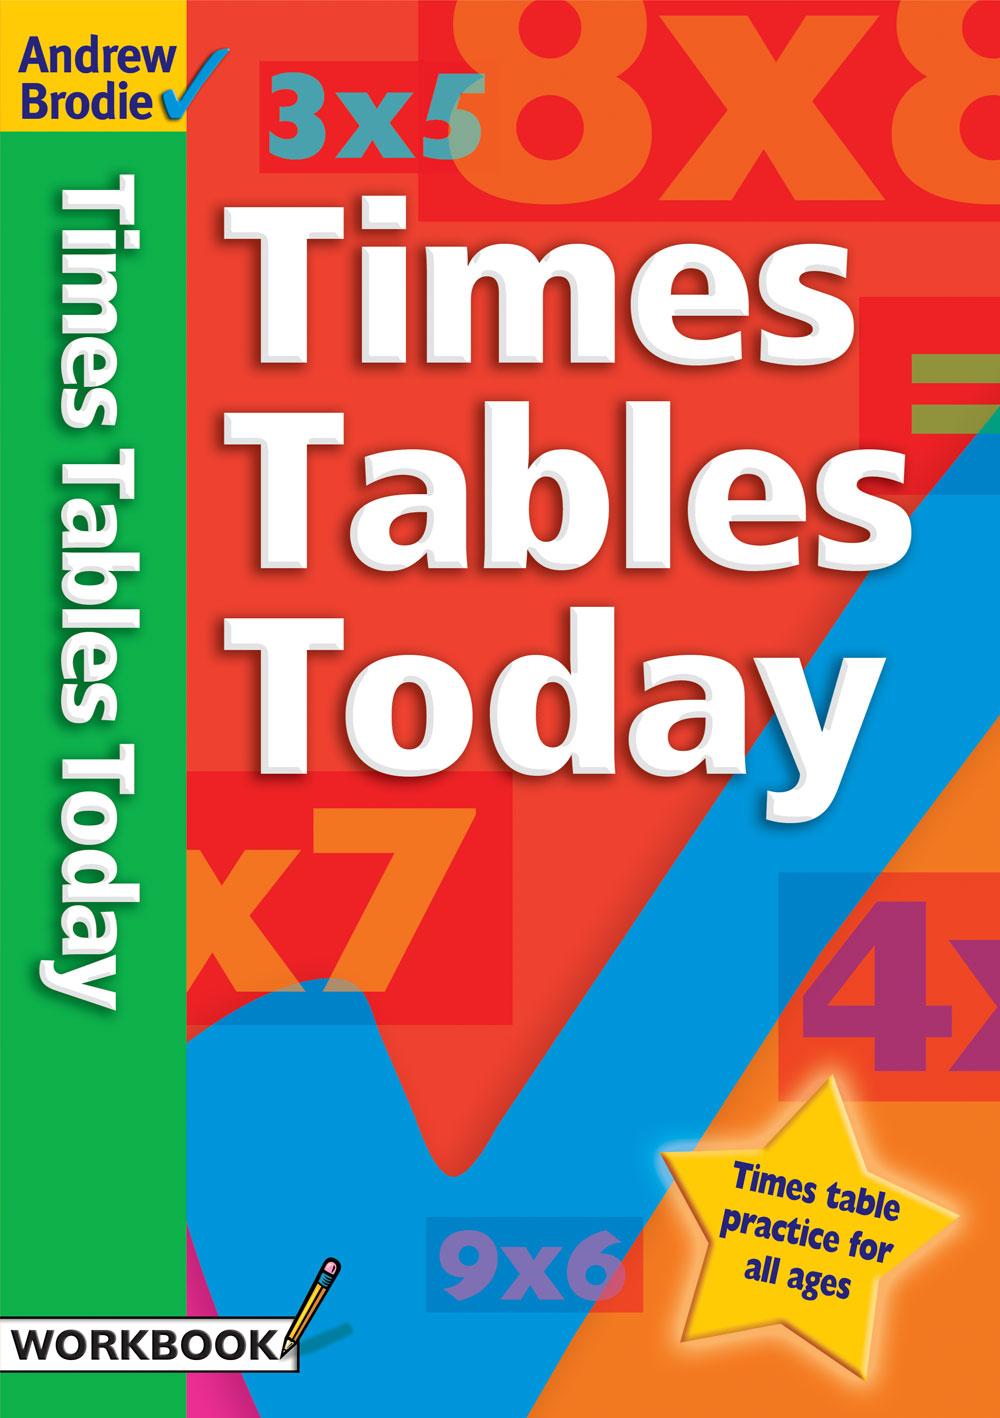 Times Tables Today - Andrew Brodie